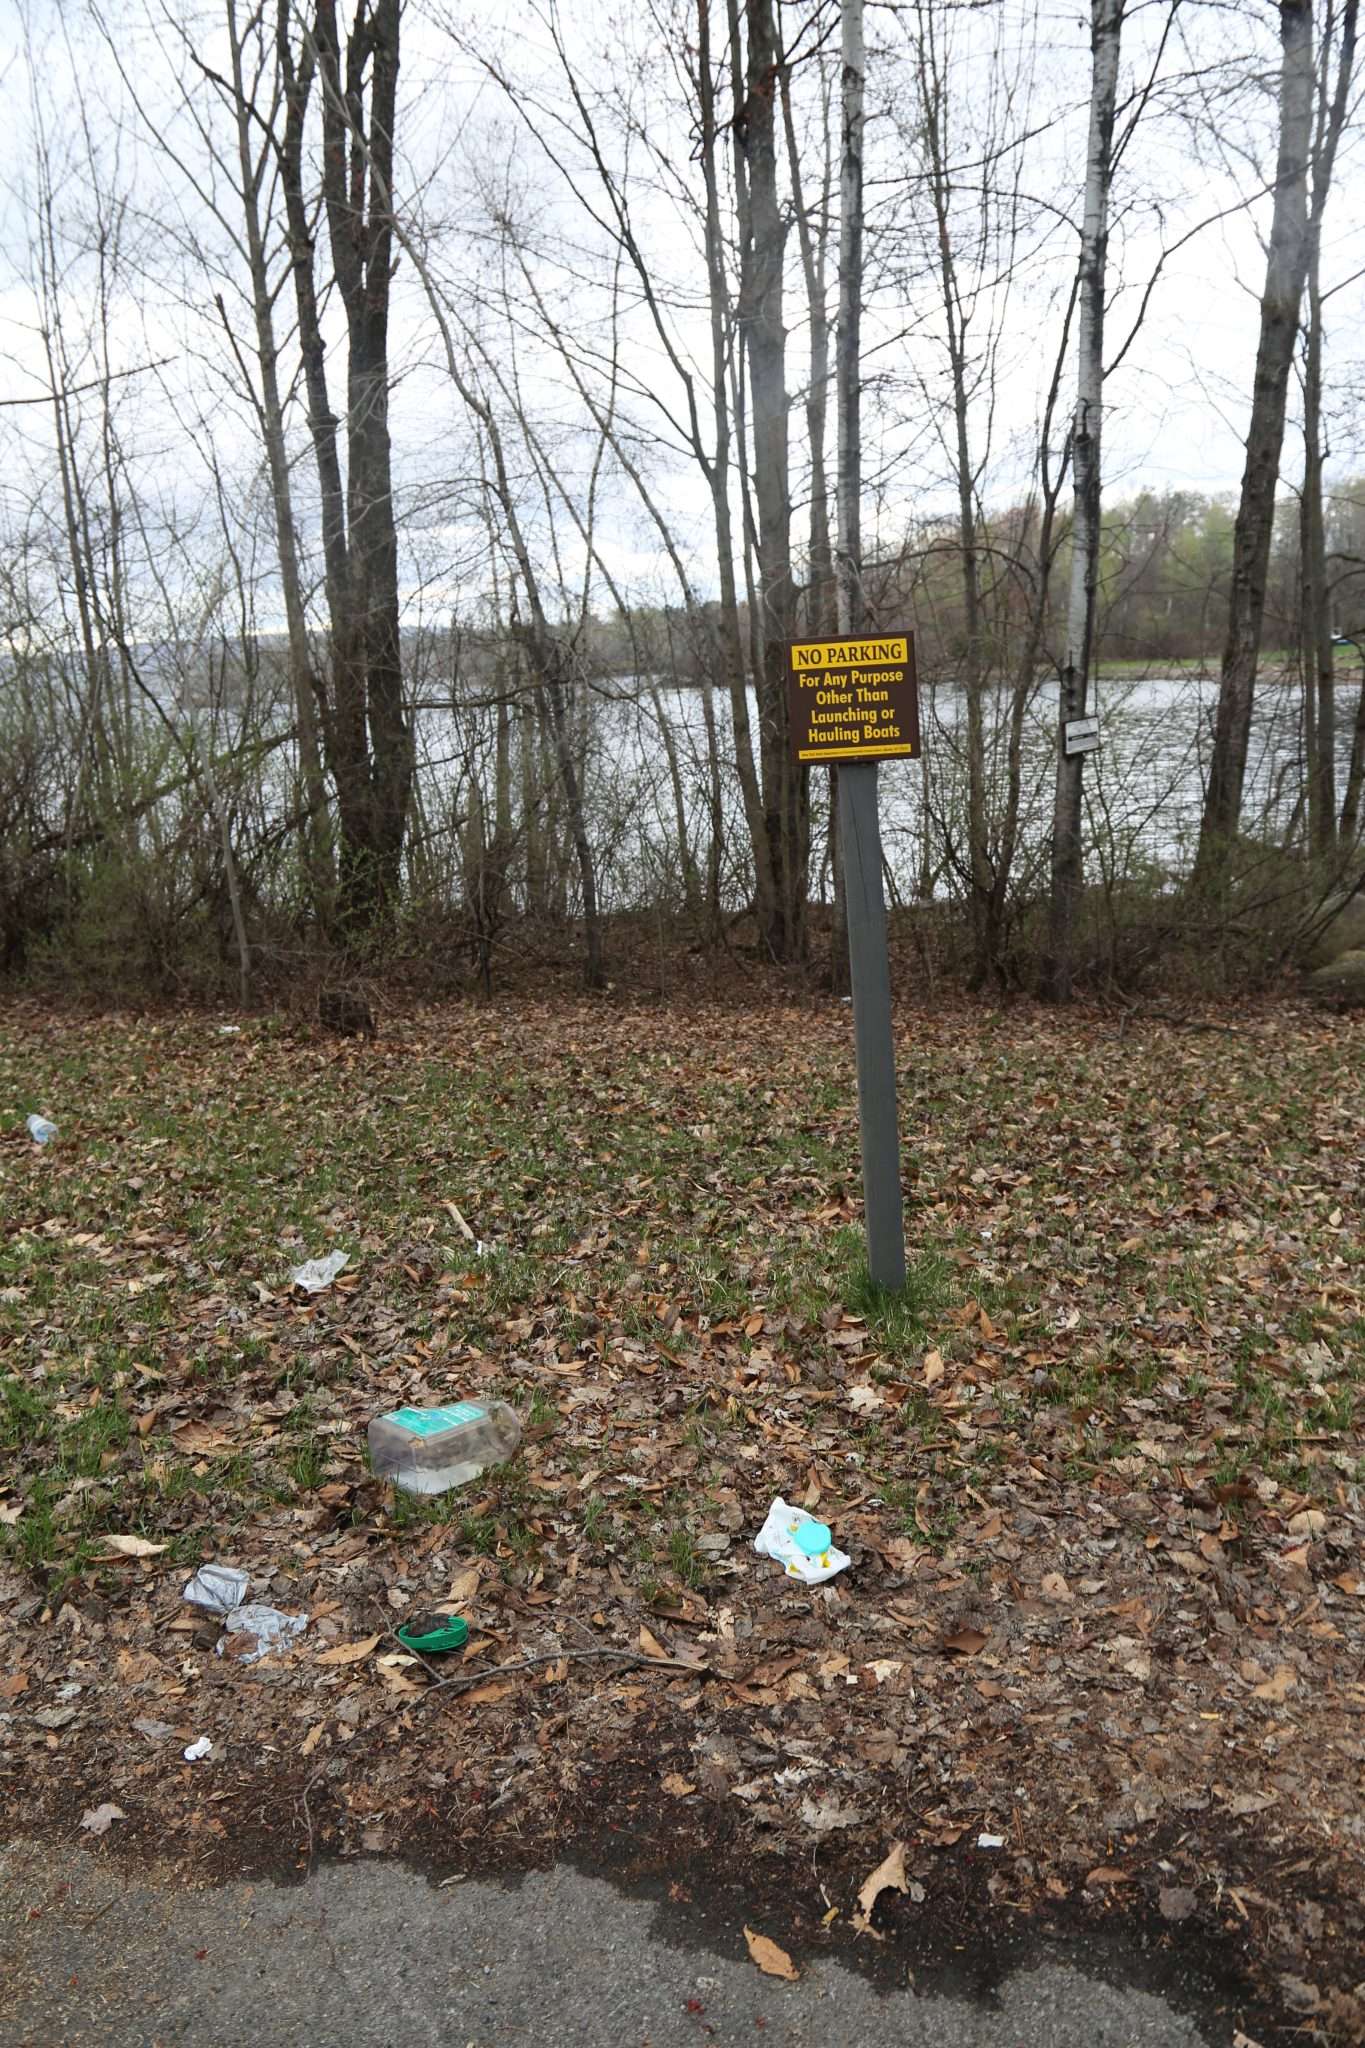 Trash is scattered under a sign for no parking at the Broadalbin Boat Launch.